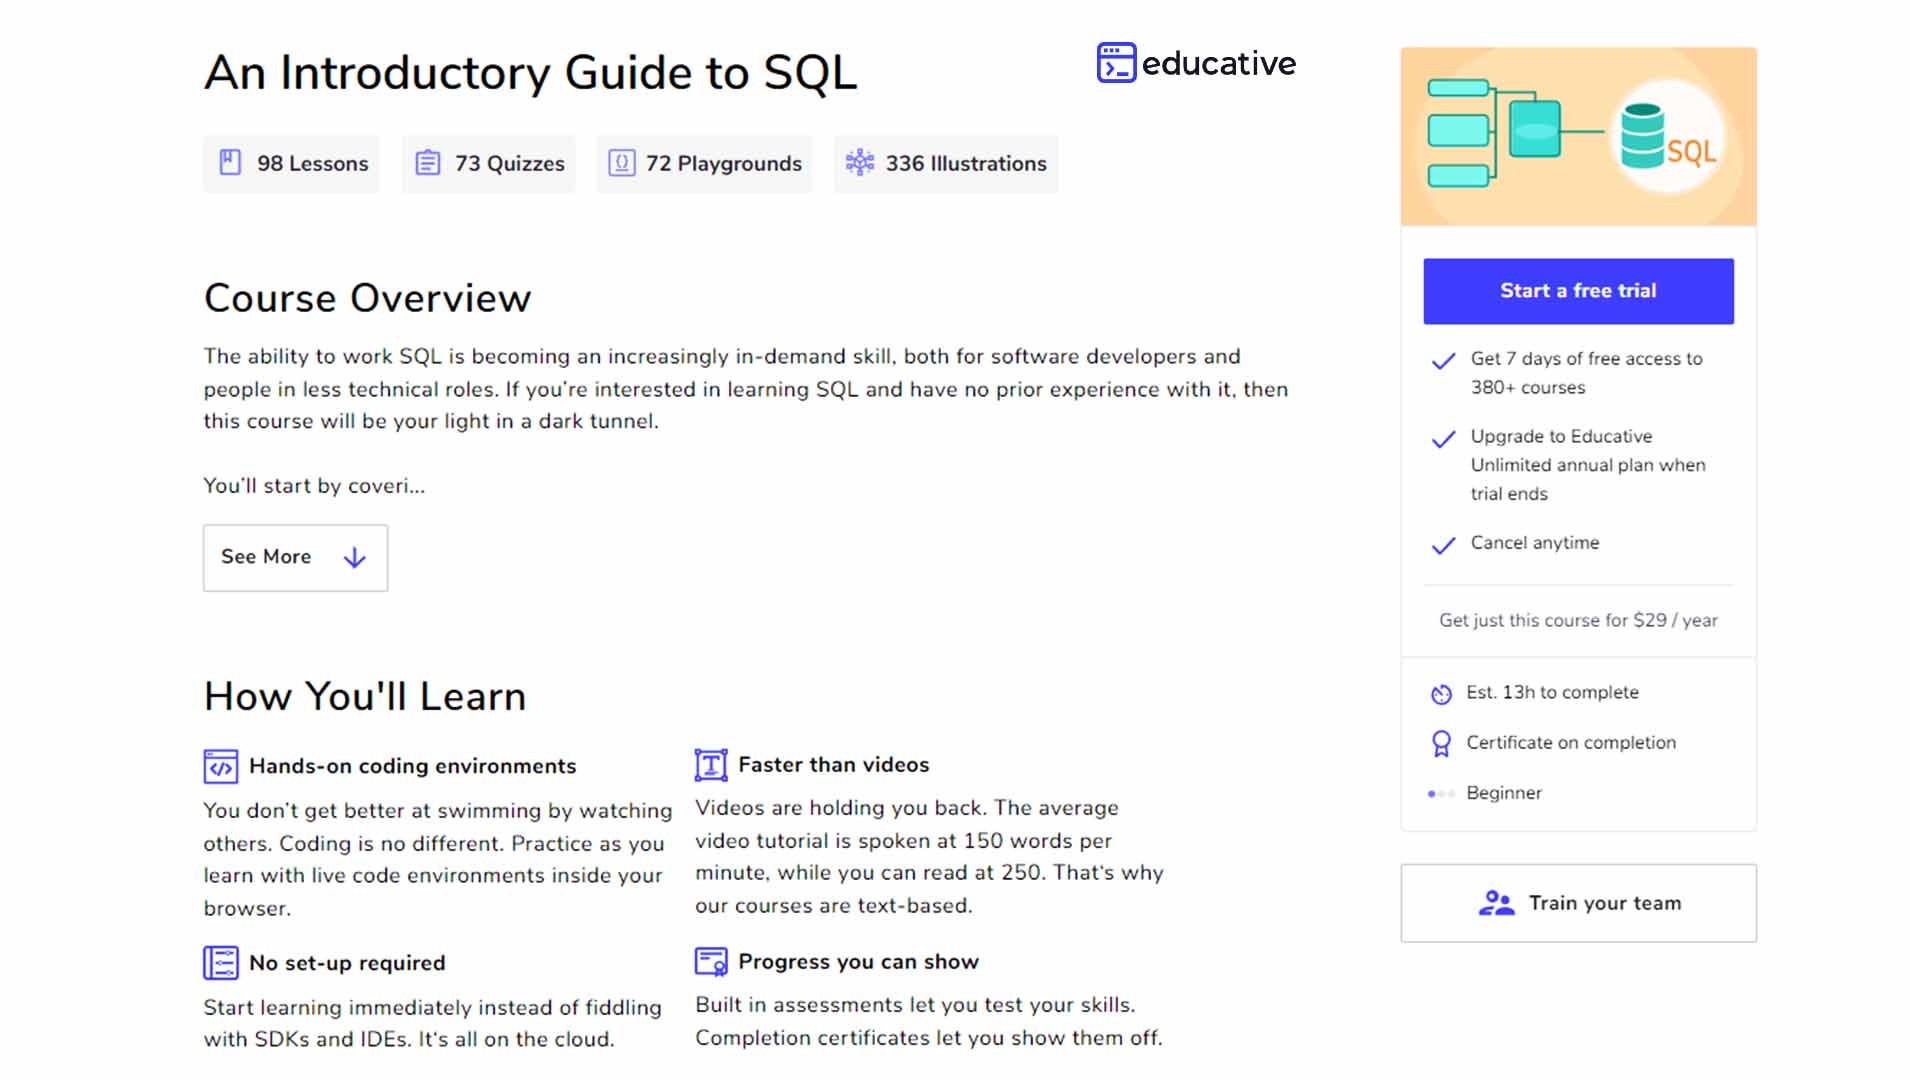 An Introductory Guide to SQL